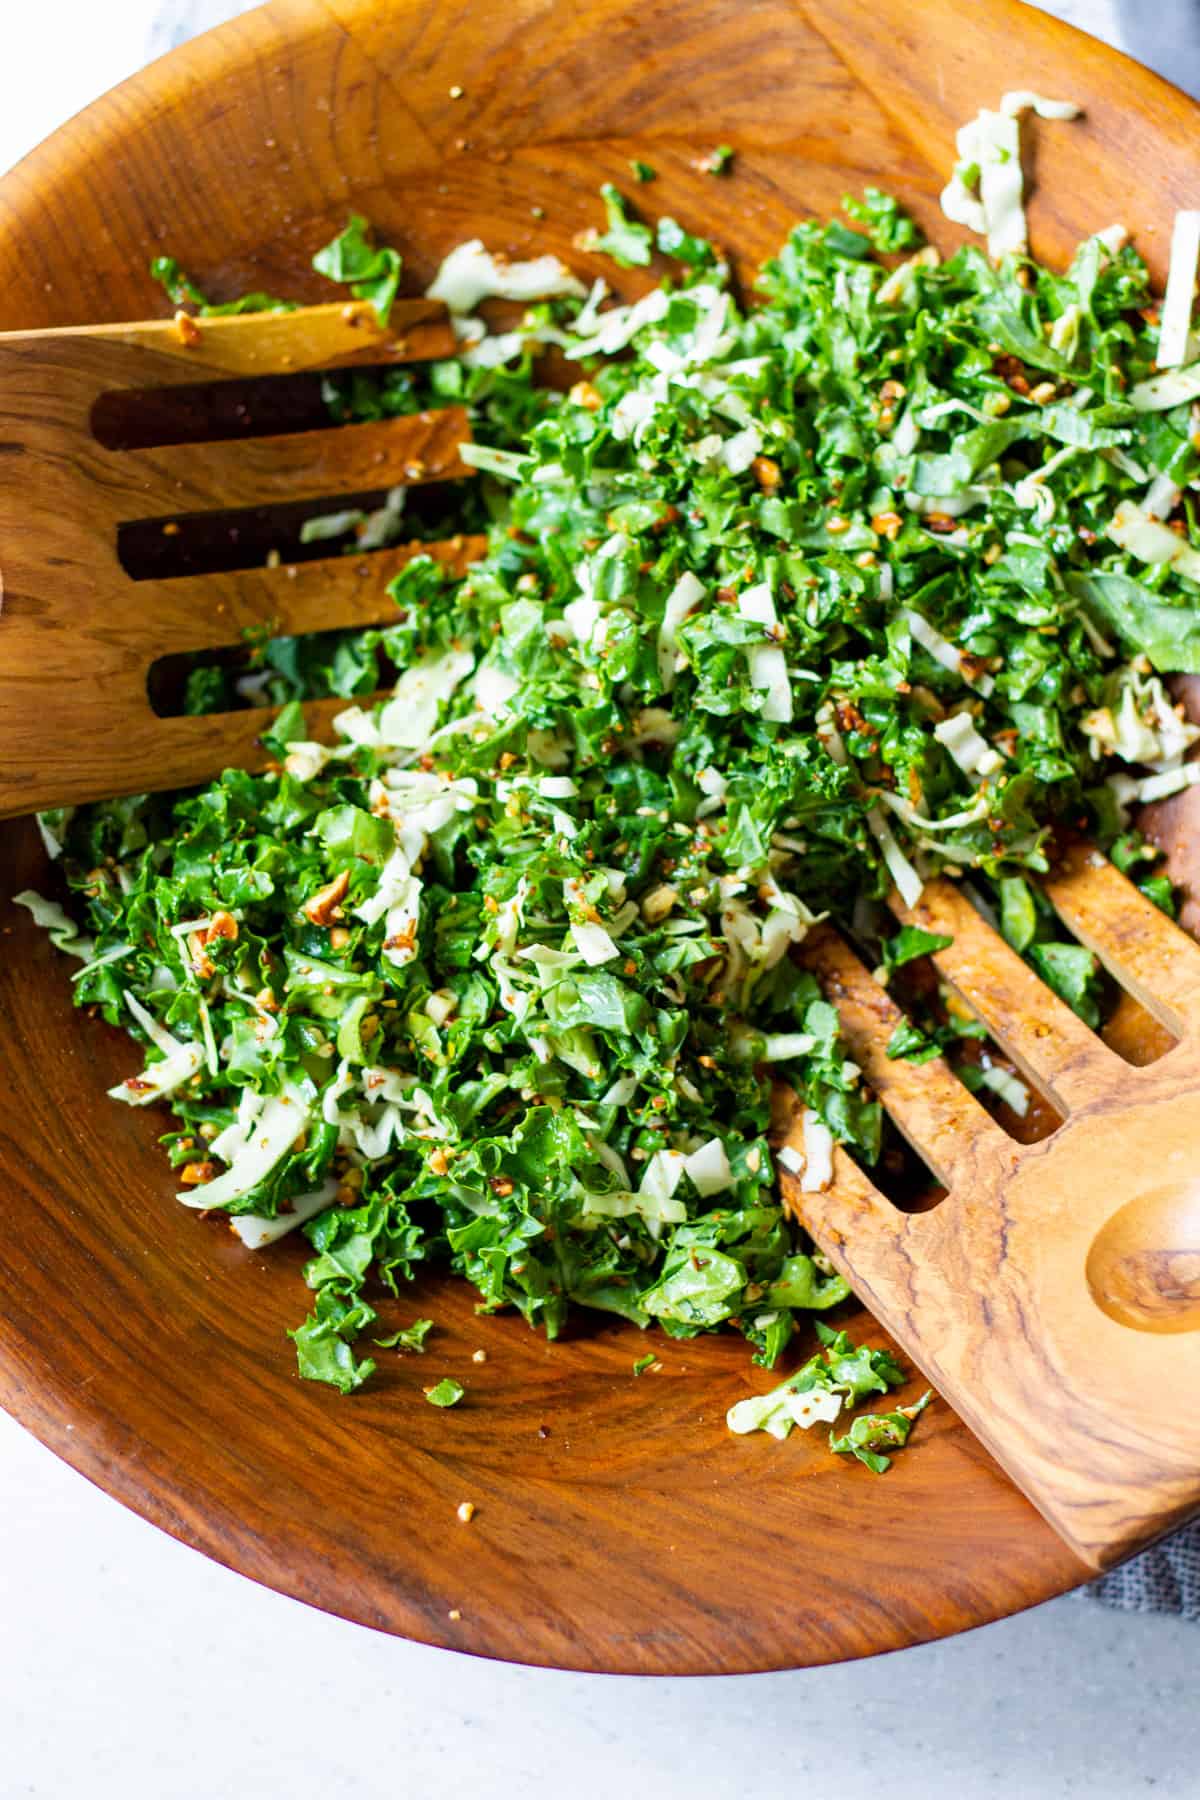 tossing salad in wooden bowl